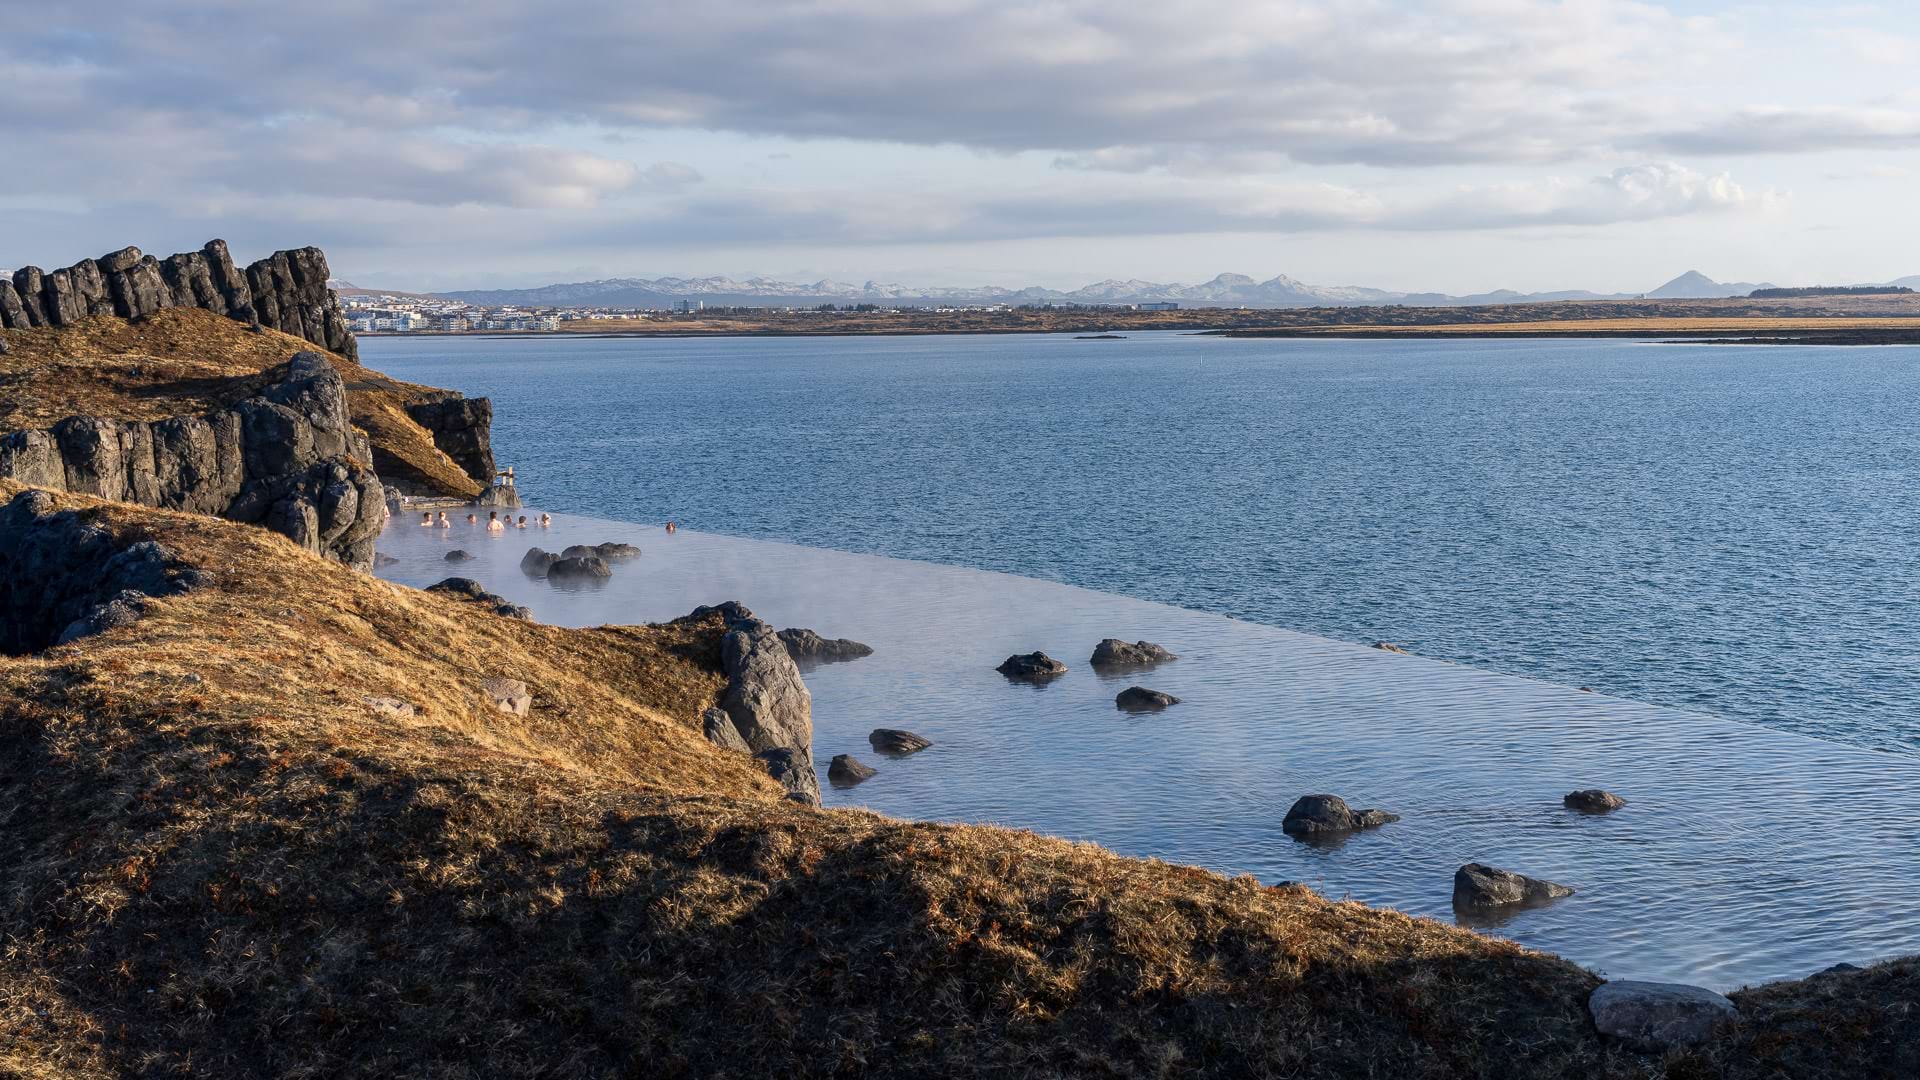 Sky Lagoon in Iceland with a view of the ocean